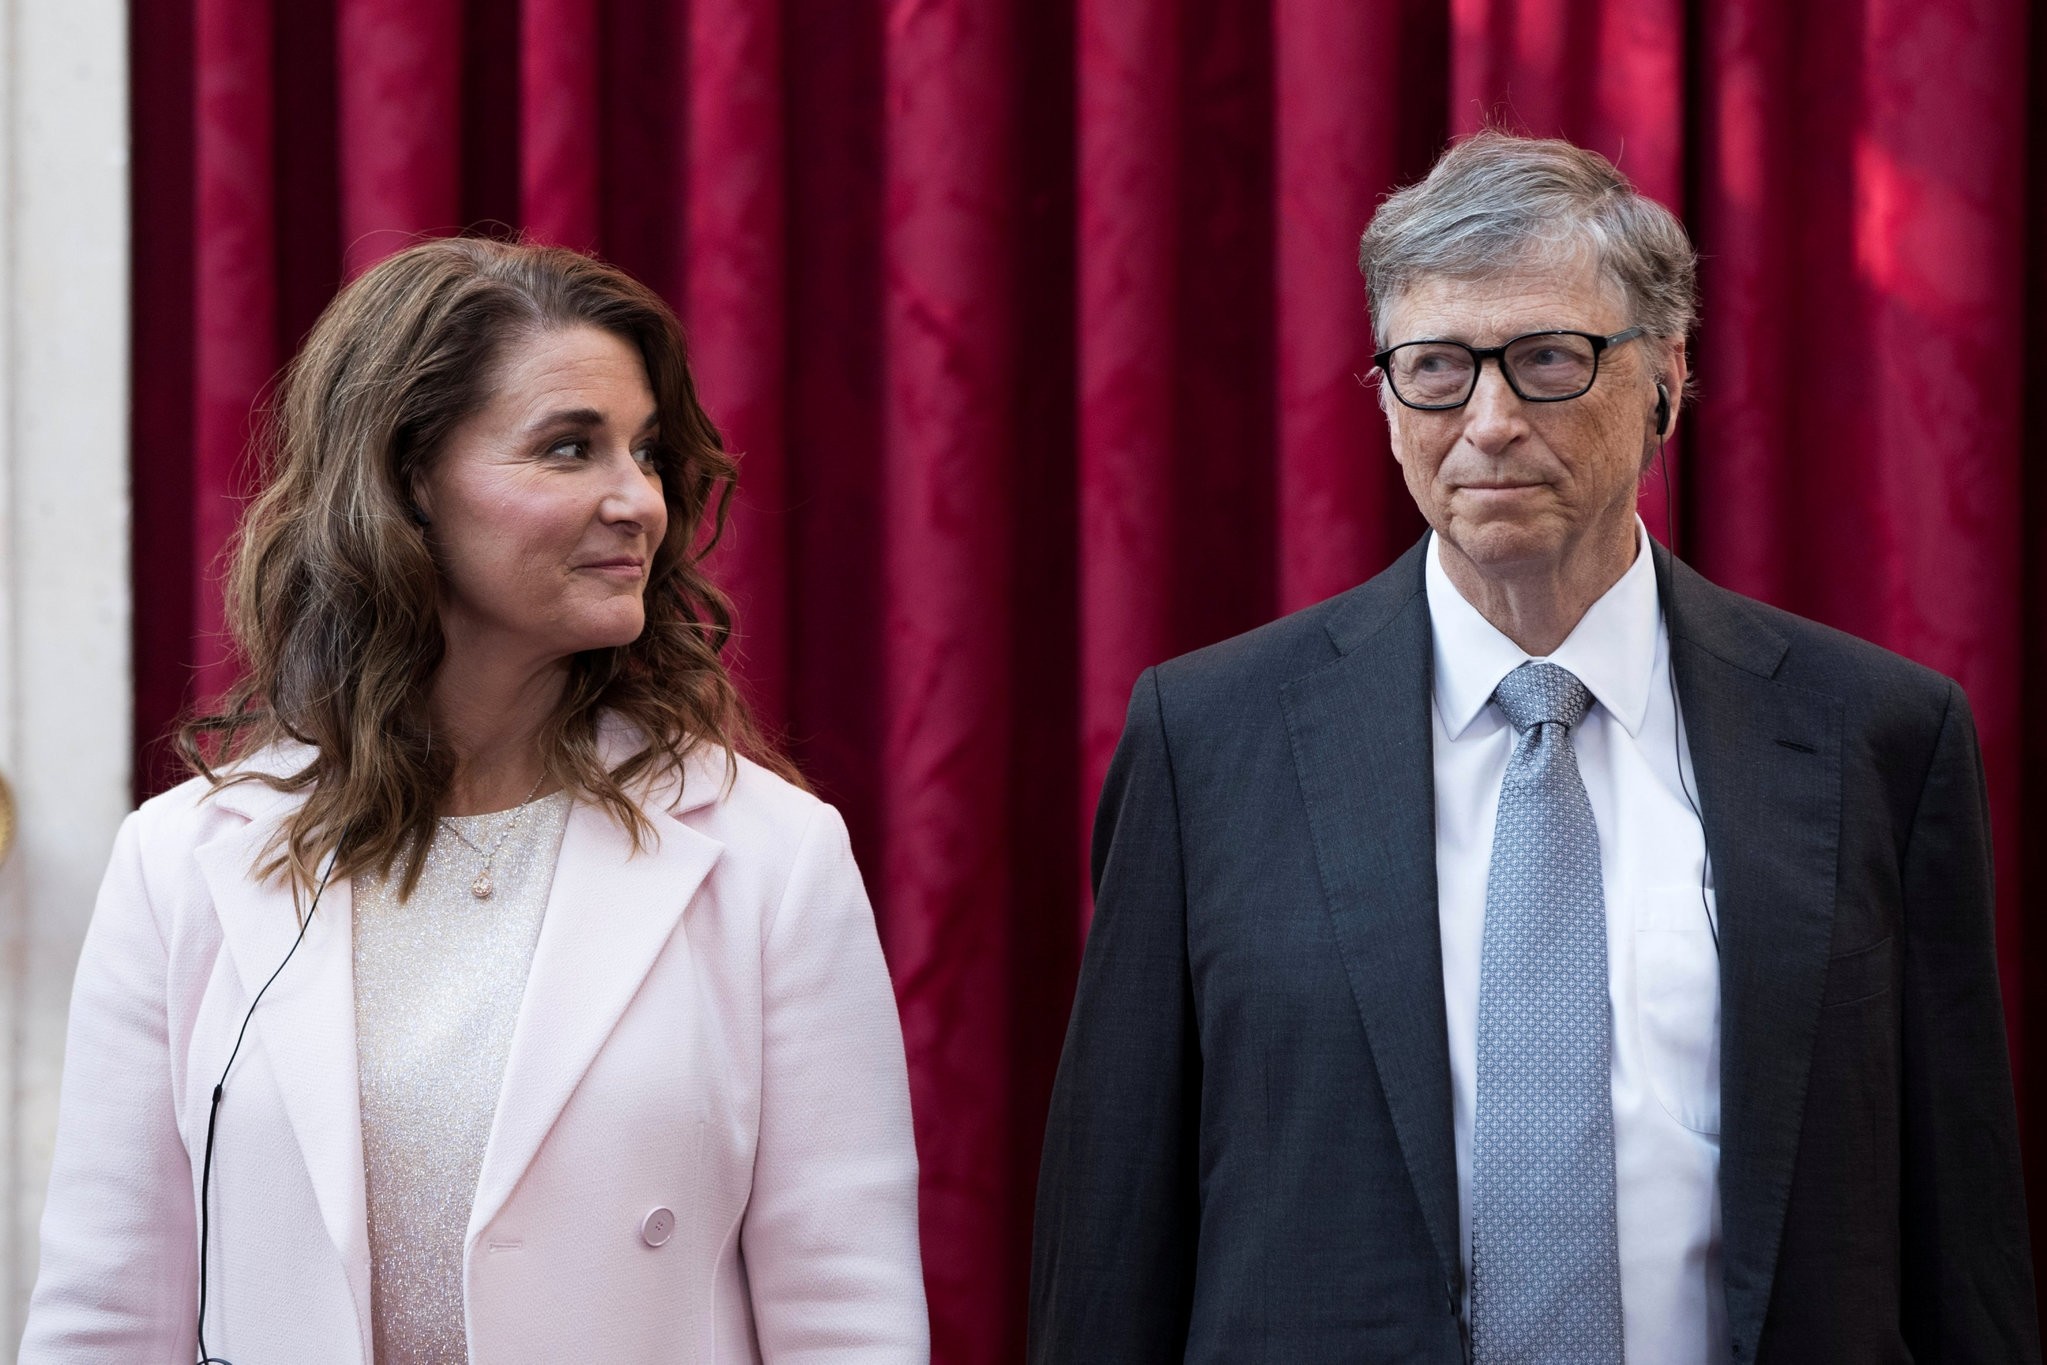 Bill Gates (R) and his wife Melinda listen to the speech by French President Francois Hollande at the Elysee Palace in Paris, France, April 21, 2017. (REUTERS Photo) 